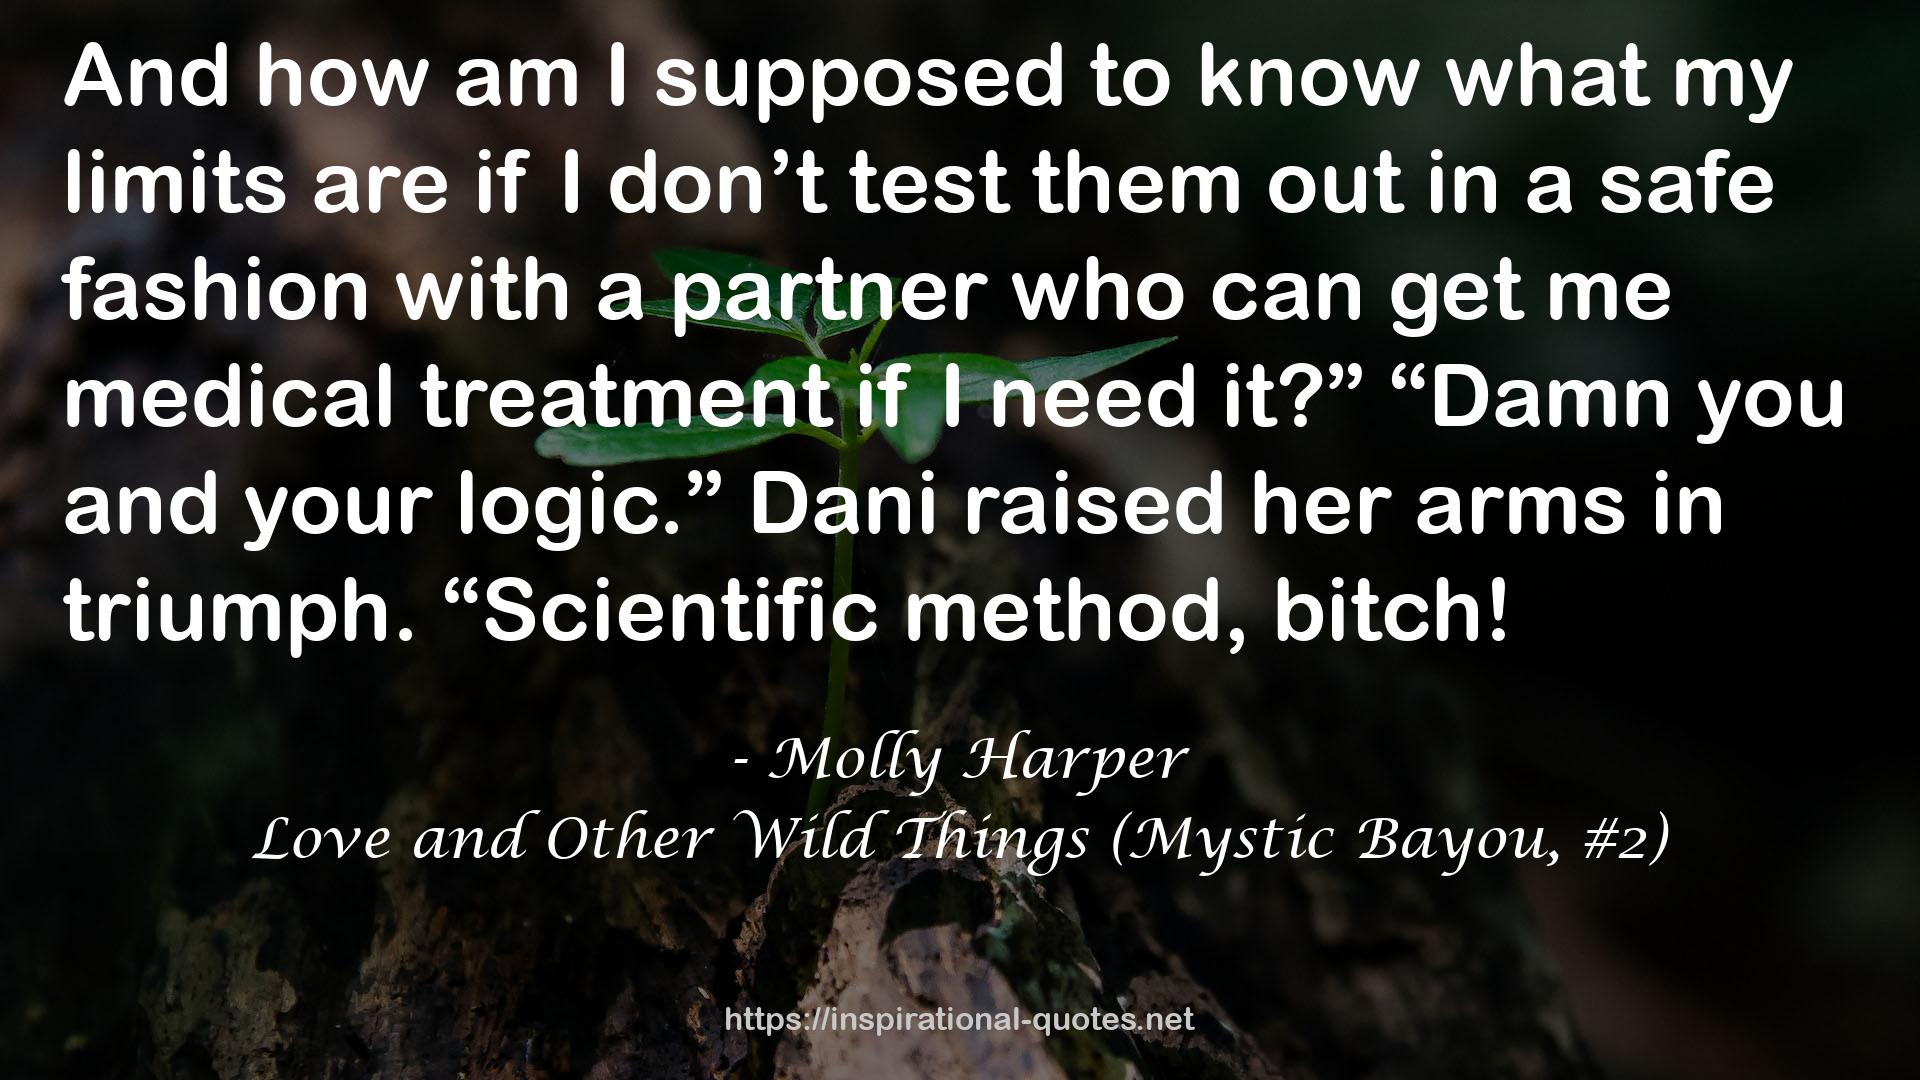 Love and Other Wild Things (Mystic Bayou, #2) QUOTES